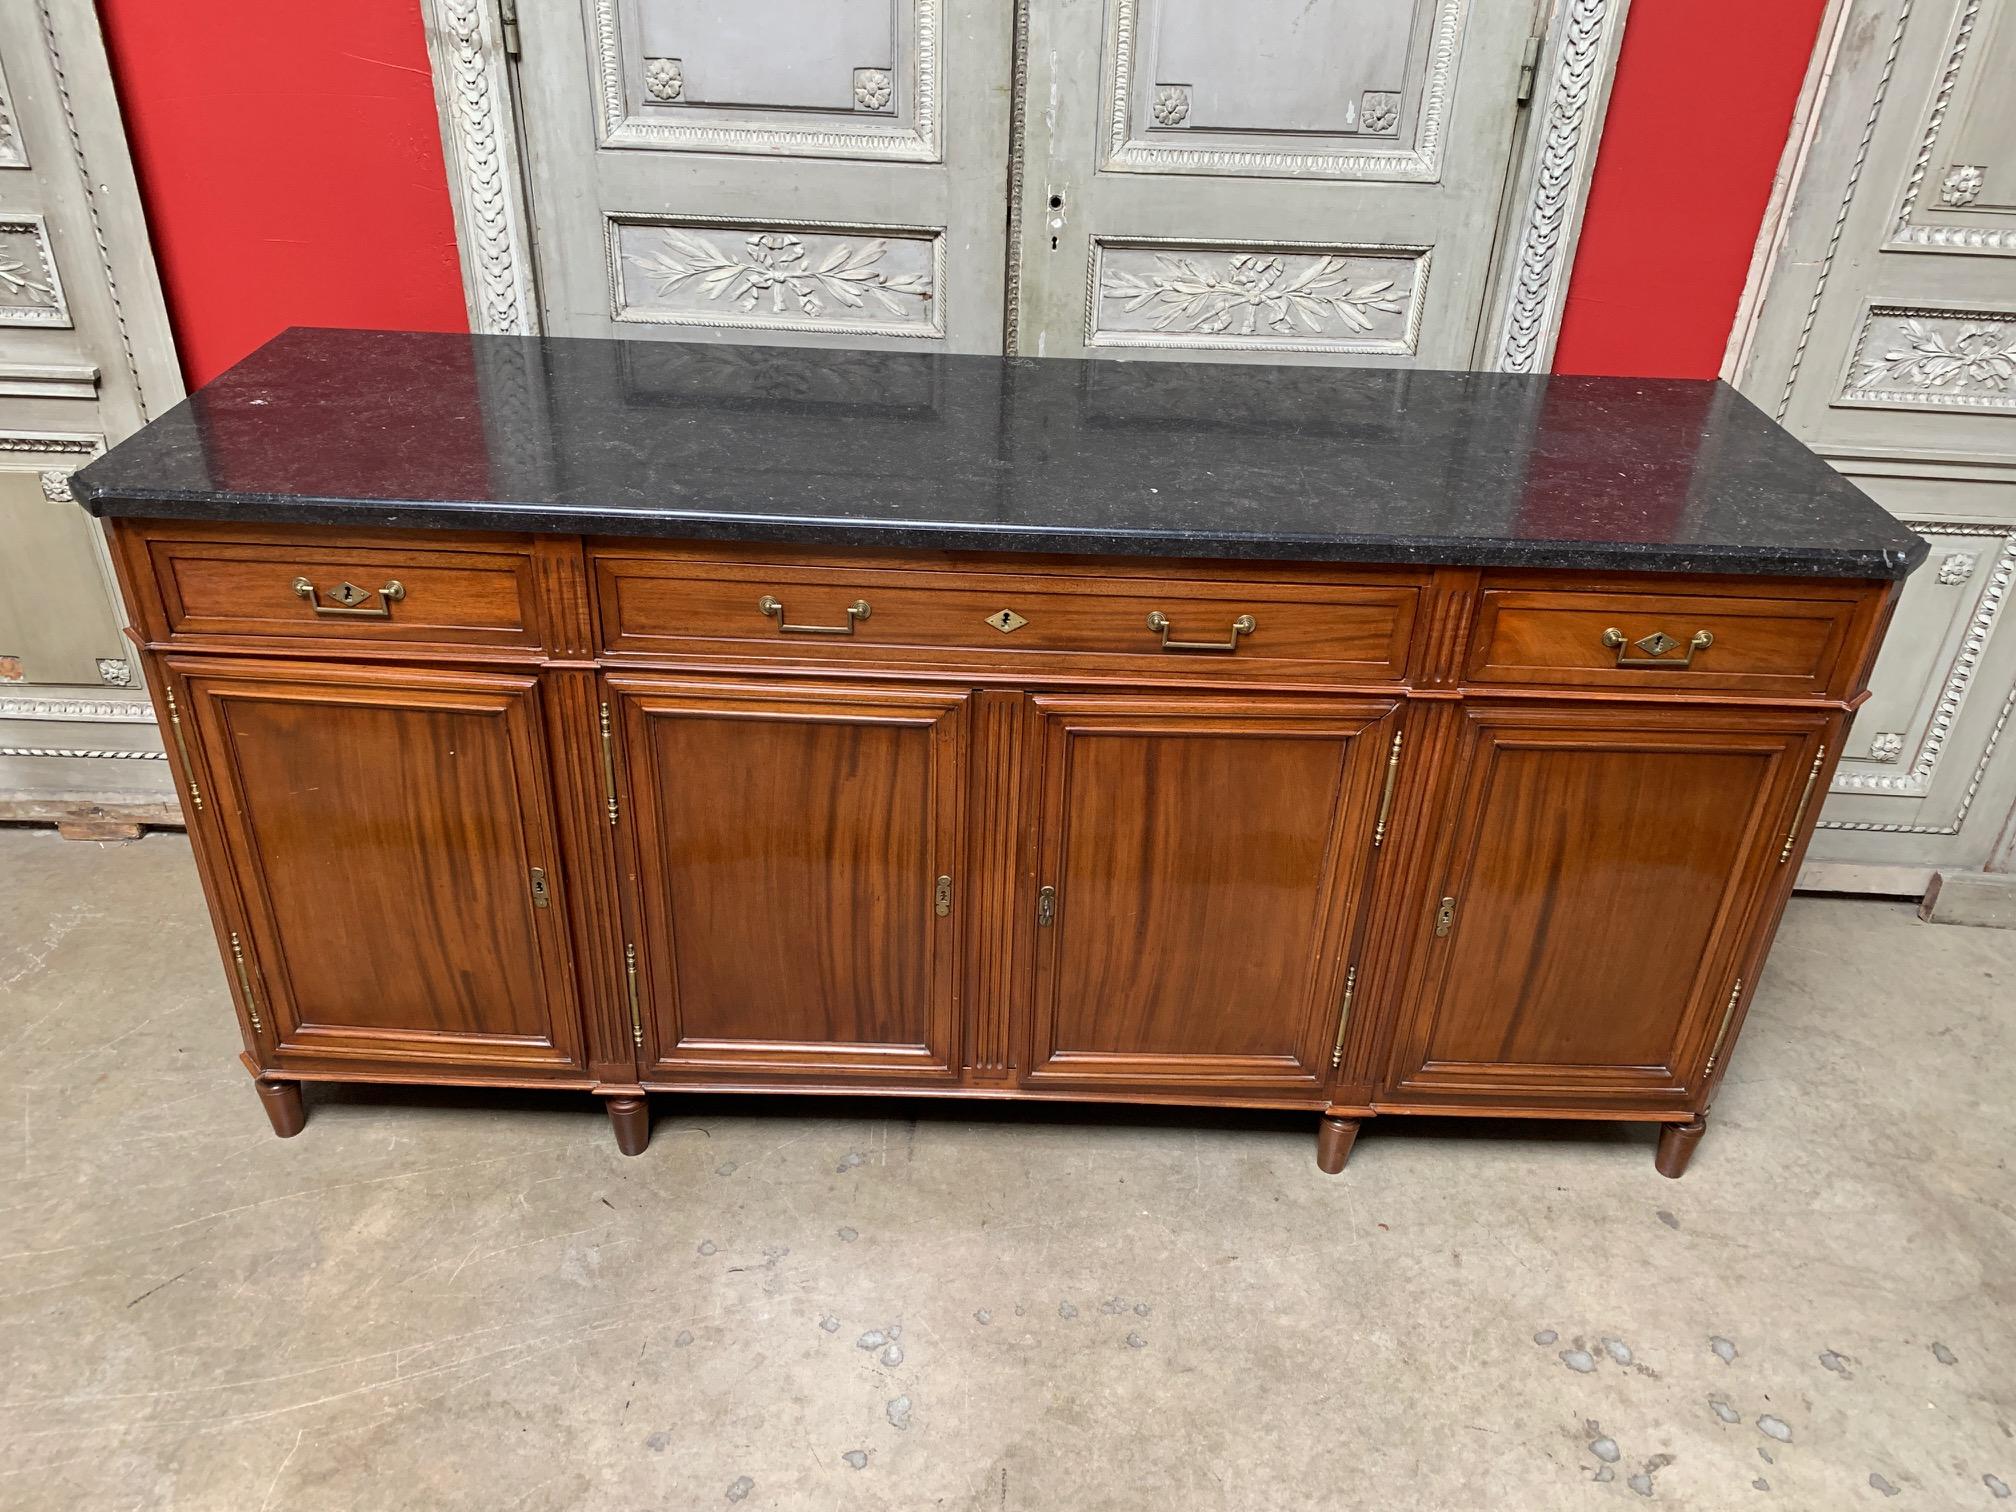 A large 18th century Parisian mahogany buffet with a newer black stone top. This French Louis XVI buffet is comprised of four doors and four drawers that are adorned with bronze hardware. This large scaled piece has ample storage and surface space.